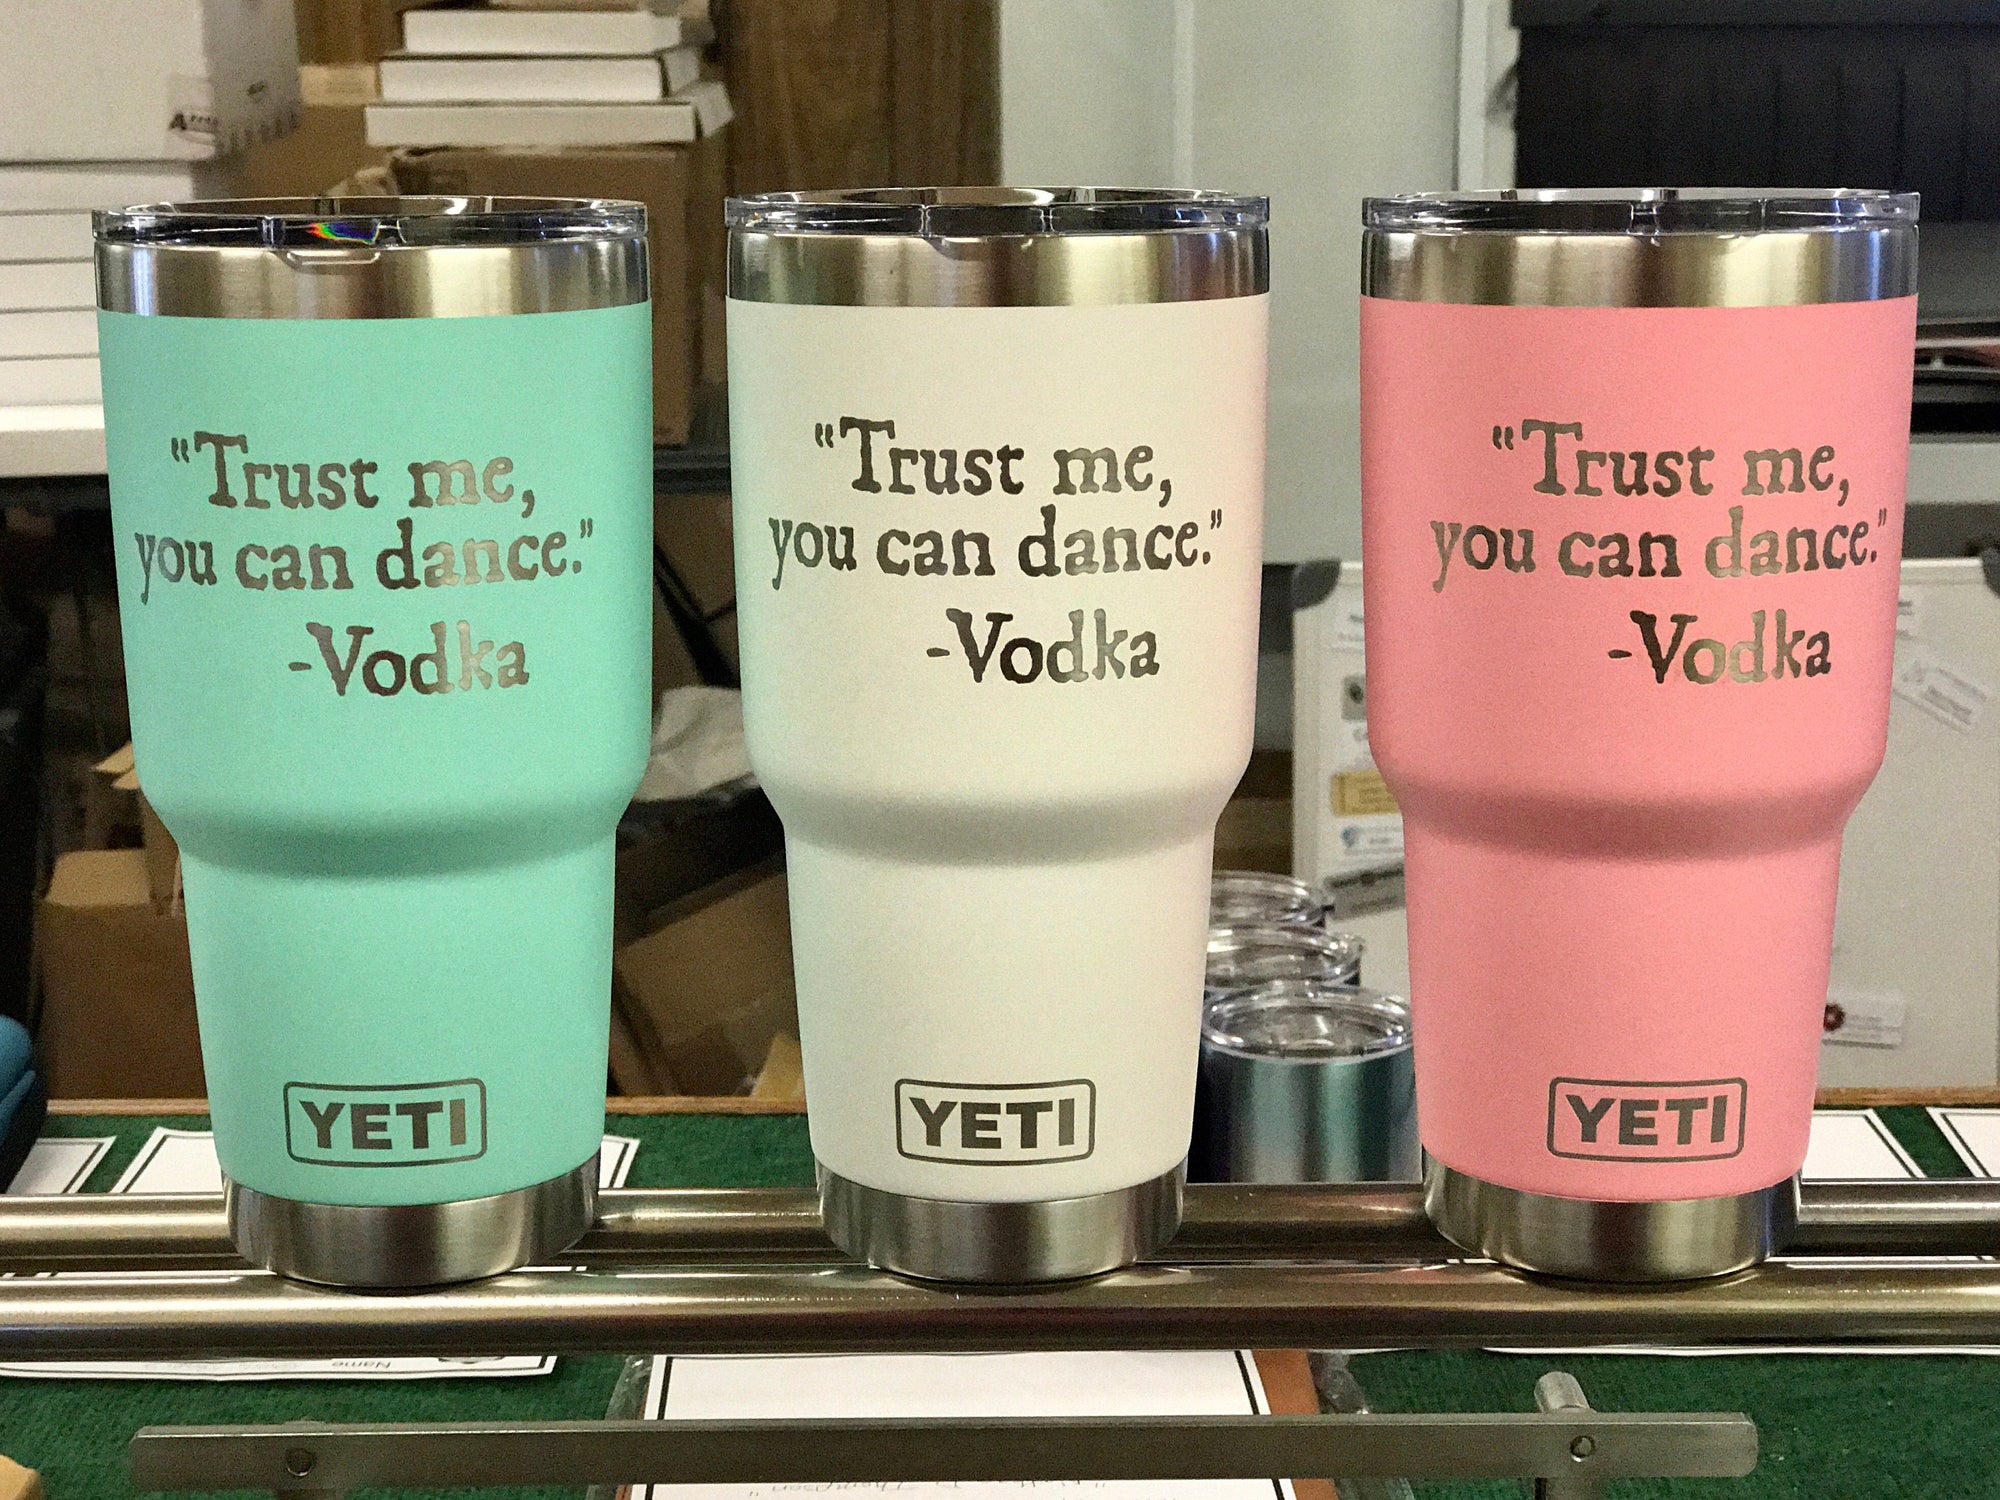 Cleverly Disguised as A Responsible Adult Funny Engraved YETI